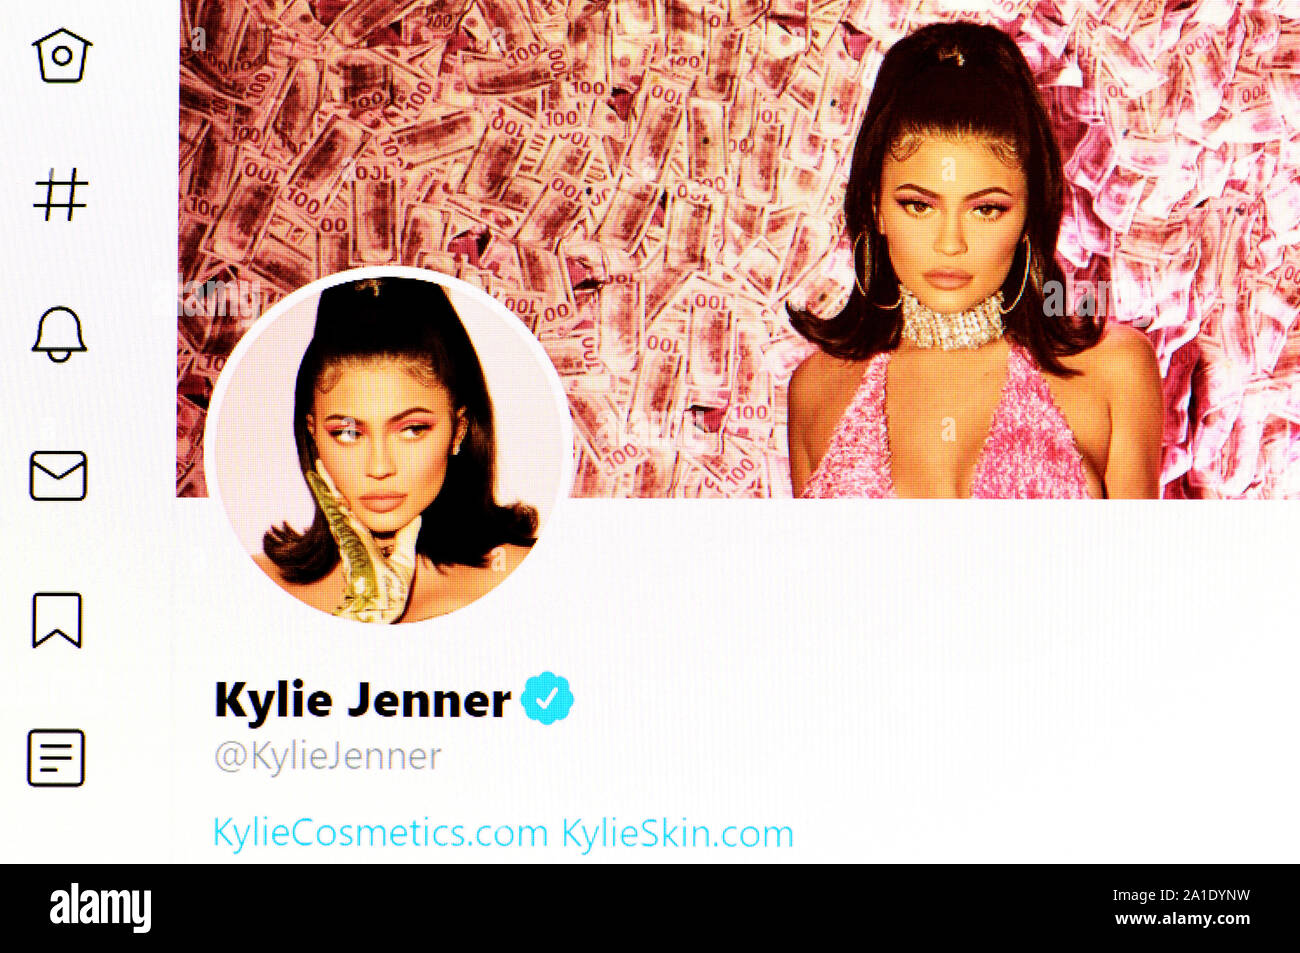 Twitter page (Sept 2019) Kylie Jenner Stock Photo